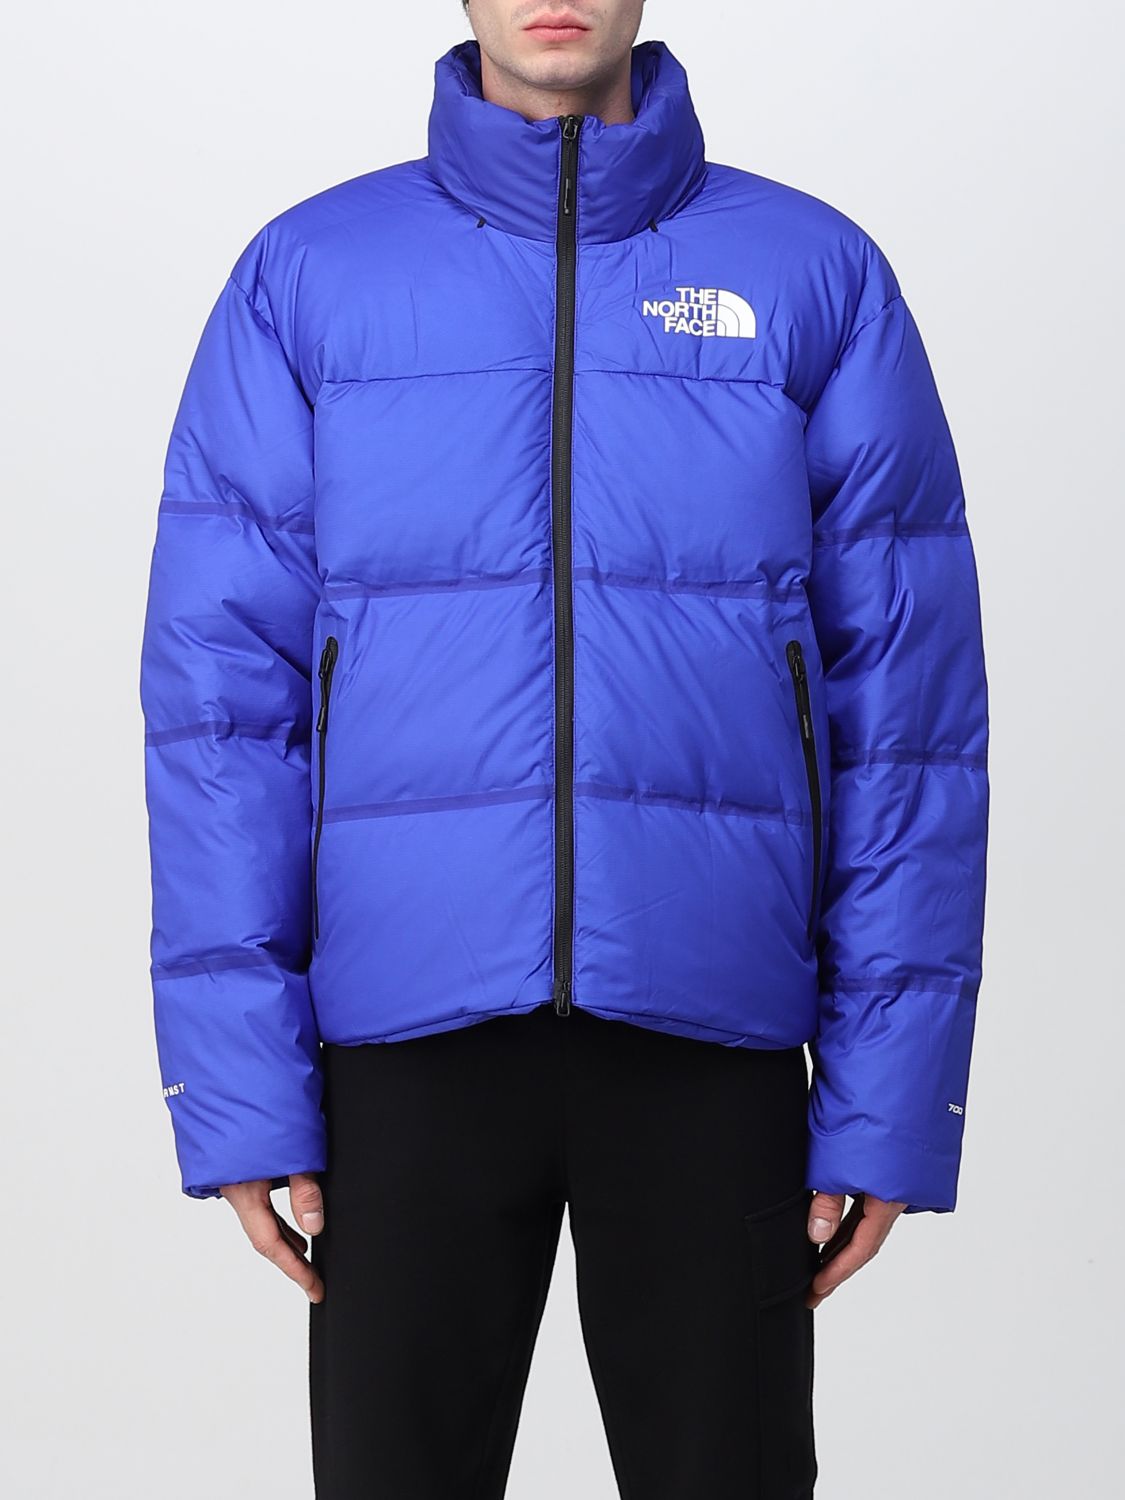 THE NORTH FACE: Jacket For Man Blue The North Face Jacket NF0A7UQZ ...